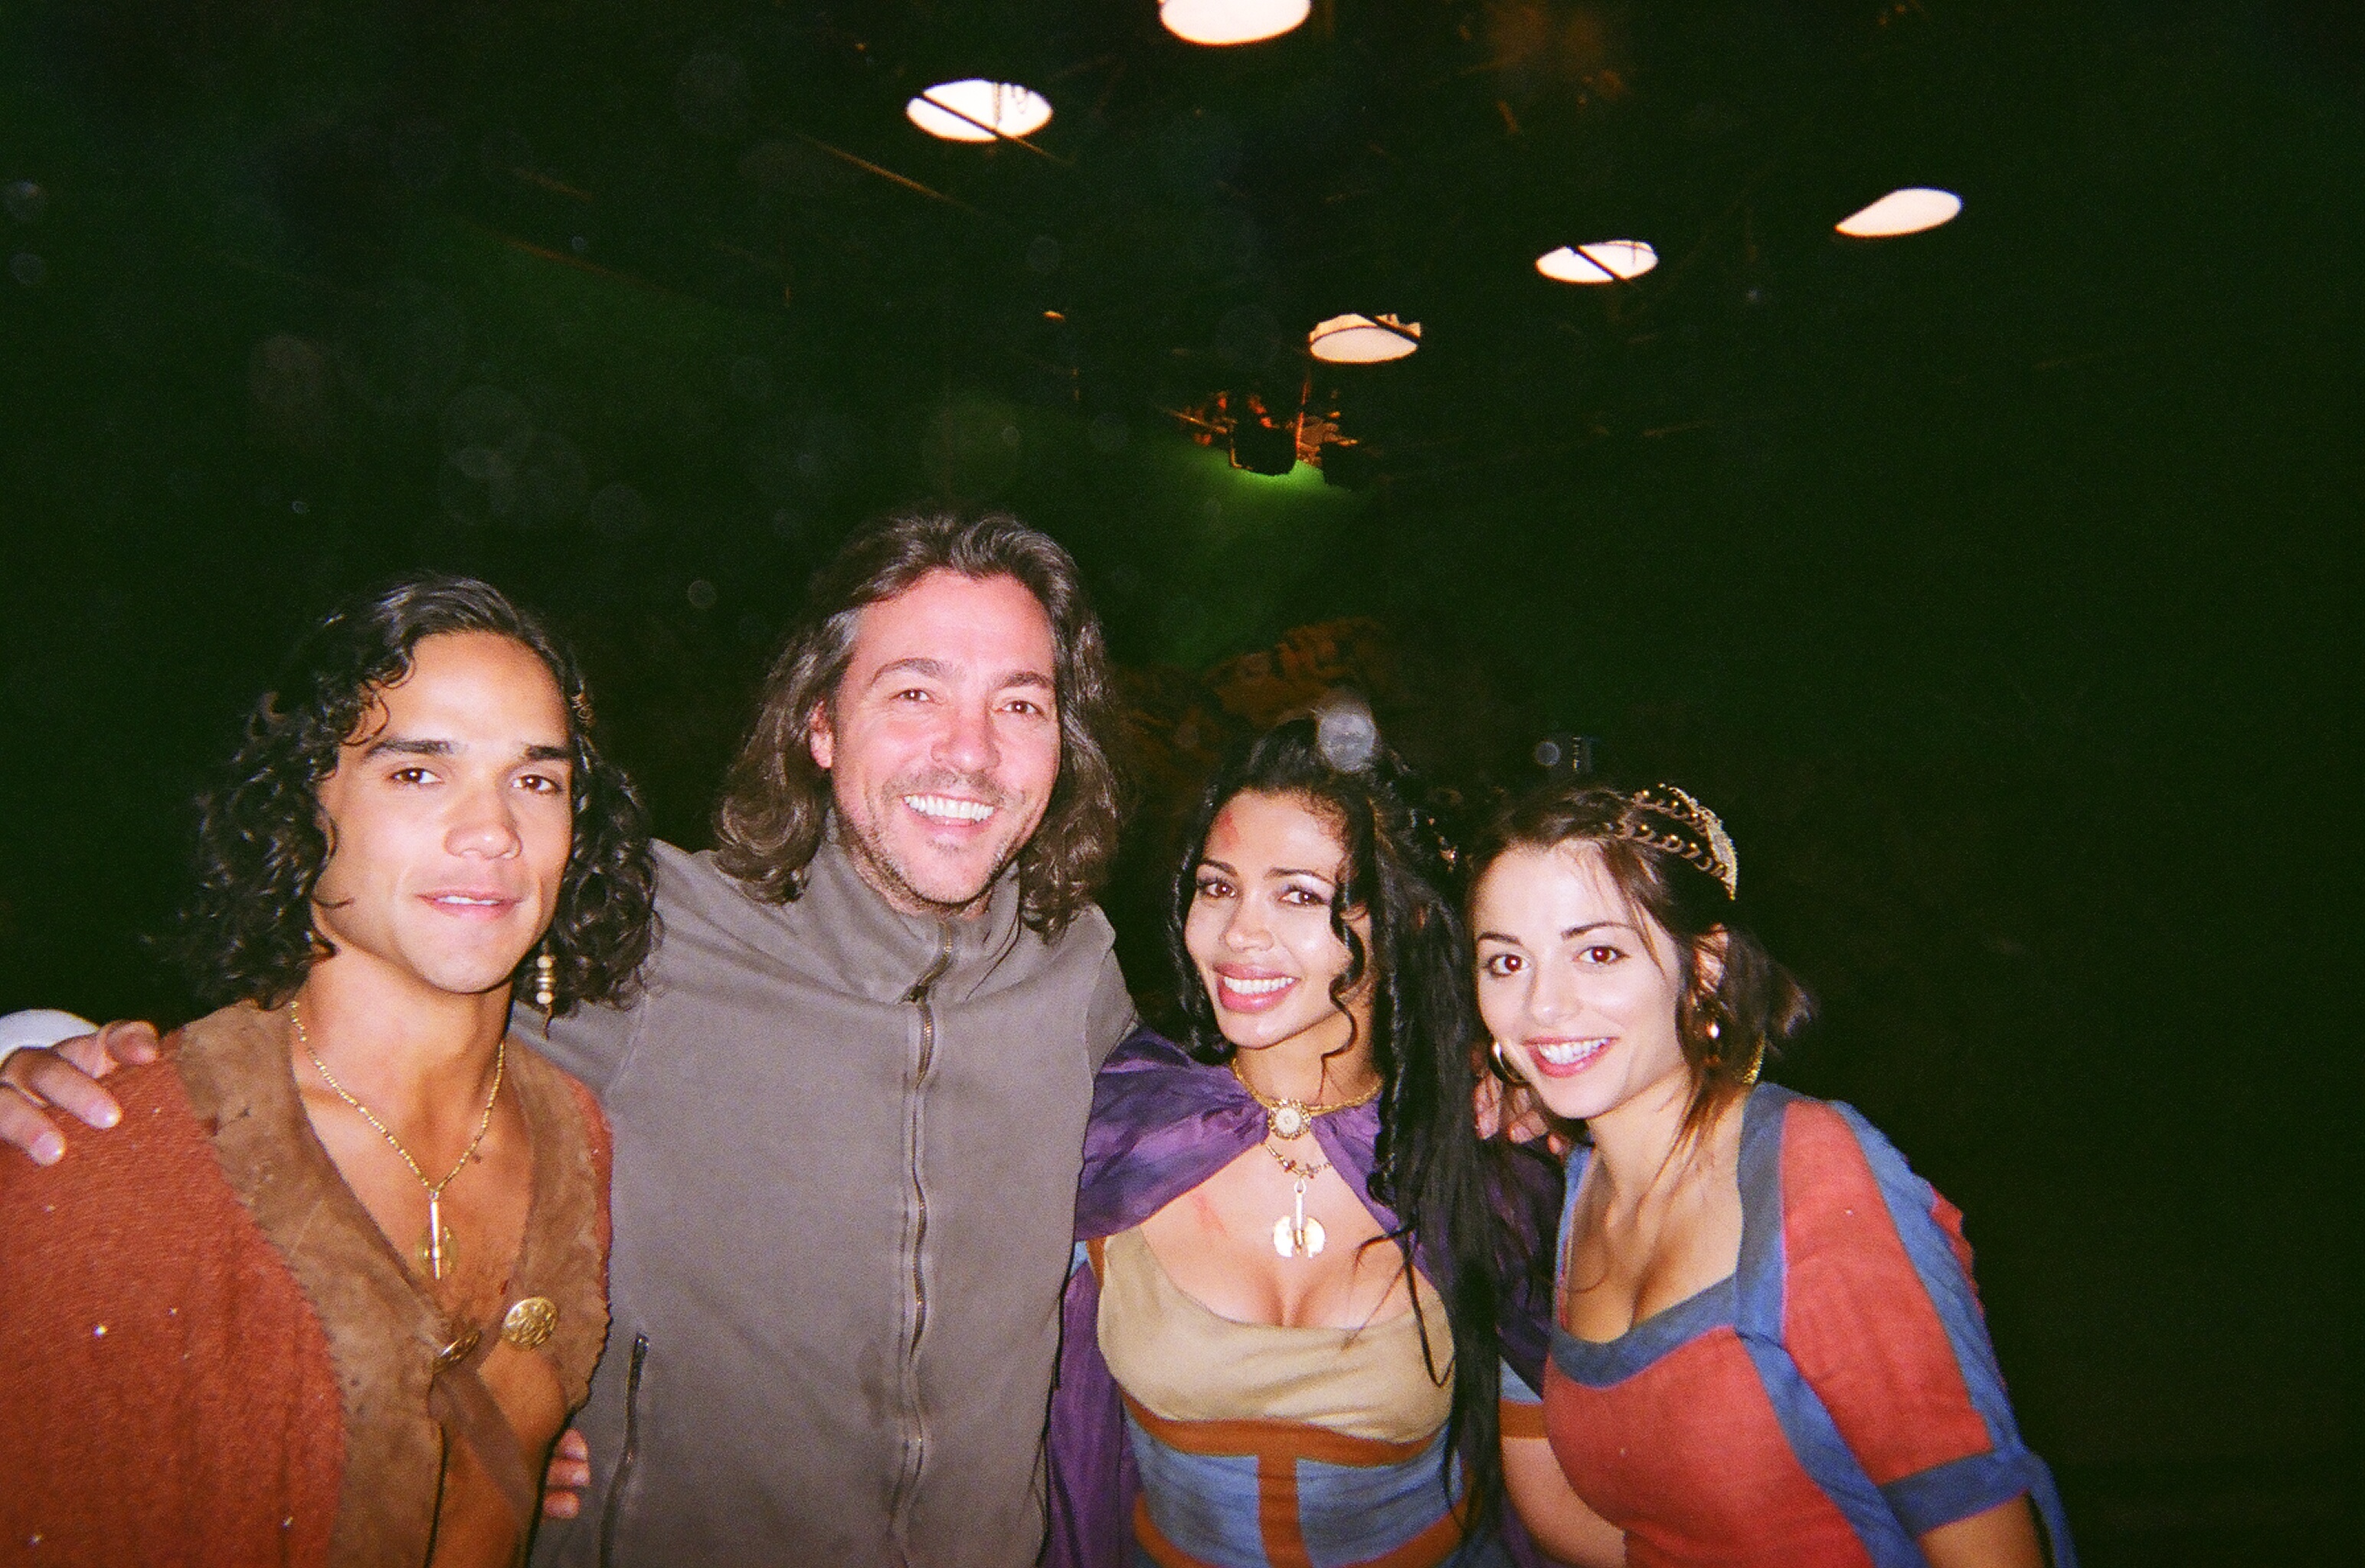 Mitch with Stephanie Leonidas, Reece Ritchie and Natalie Becker on the Atlantis set